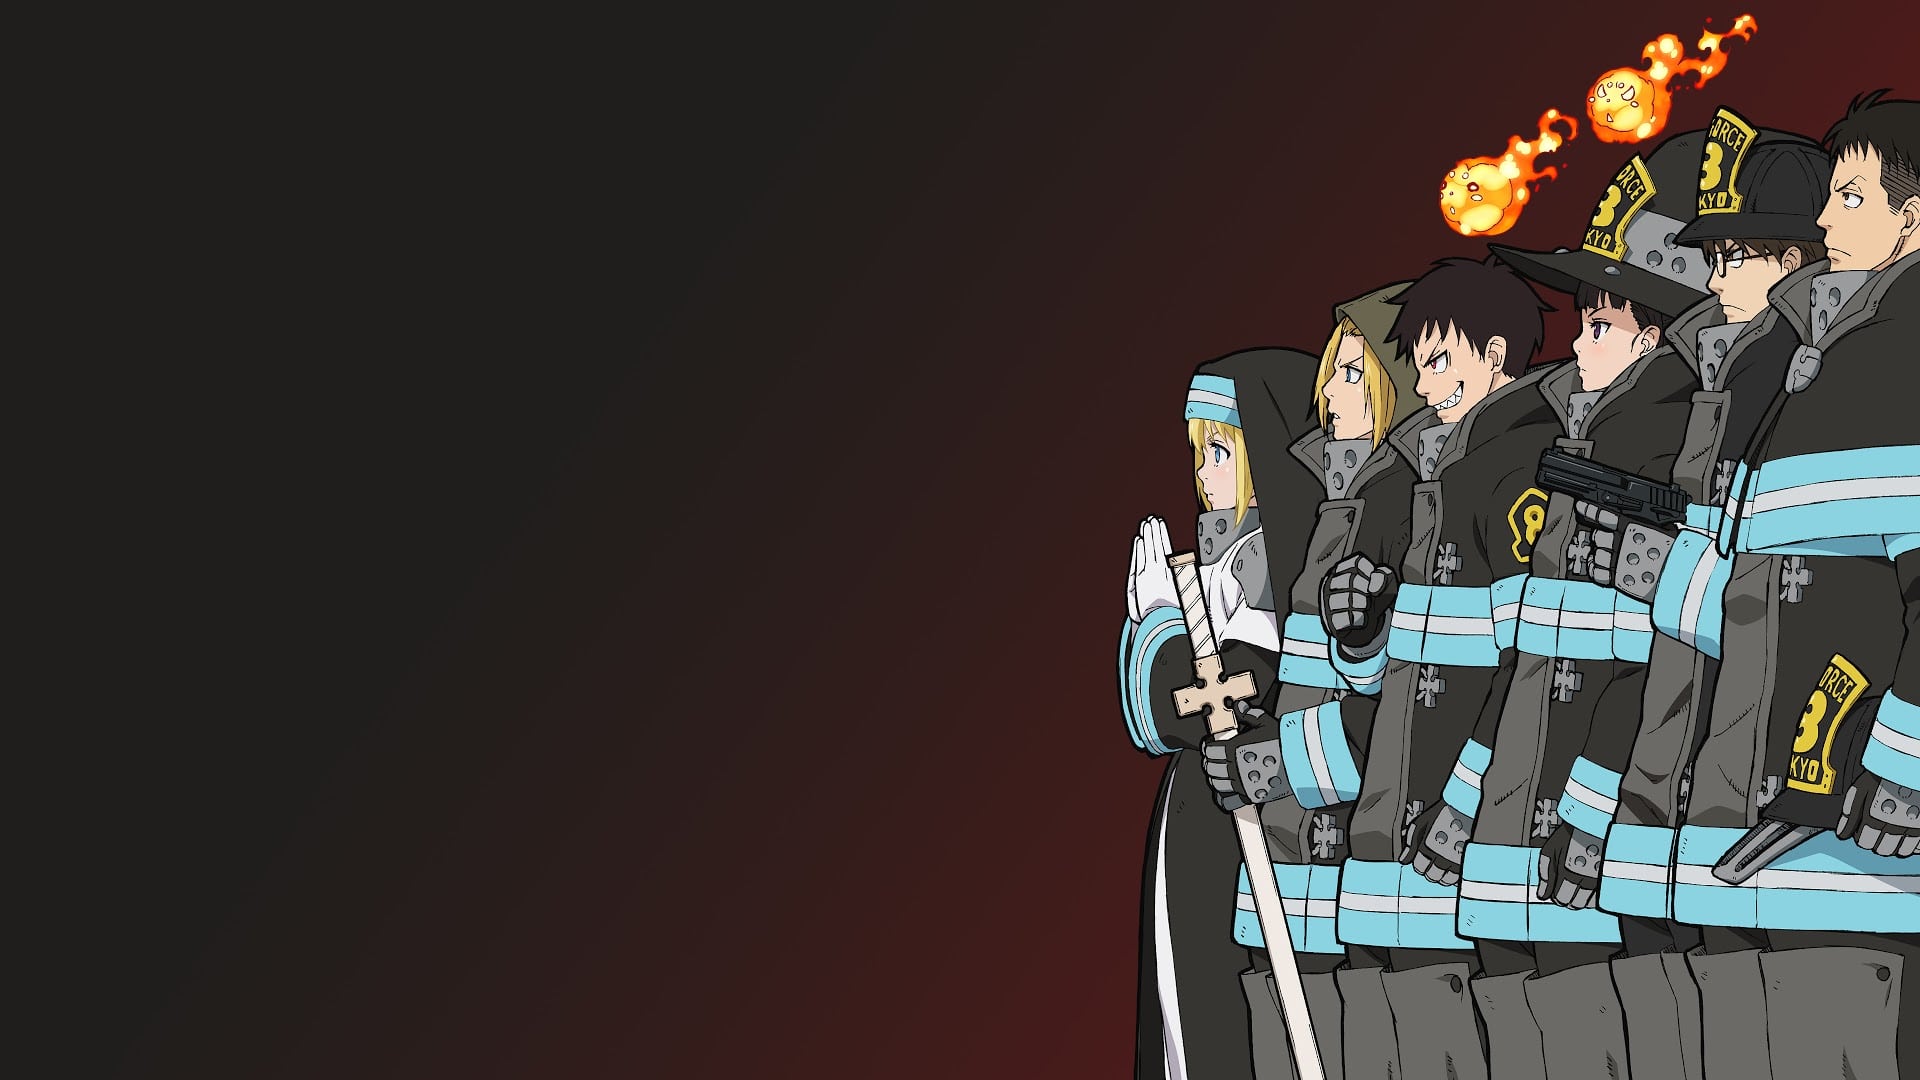 HD Fire Force Wallpapers - KoLPaPer - Awesome Free HD Wallpapers